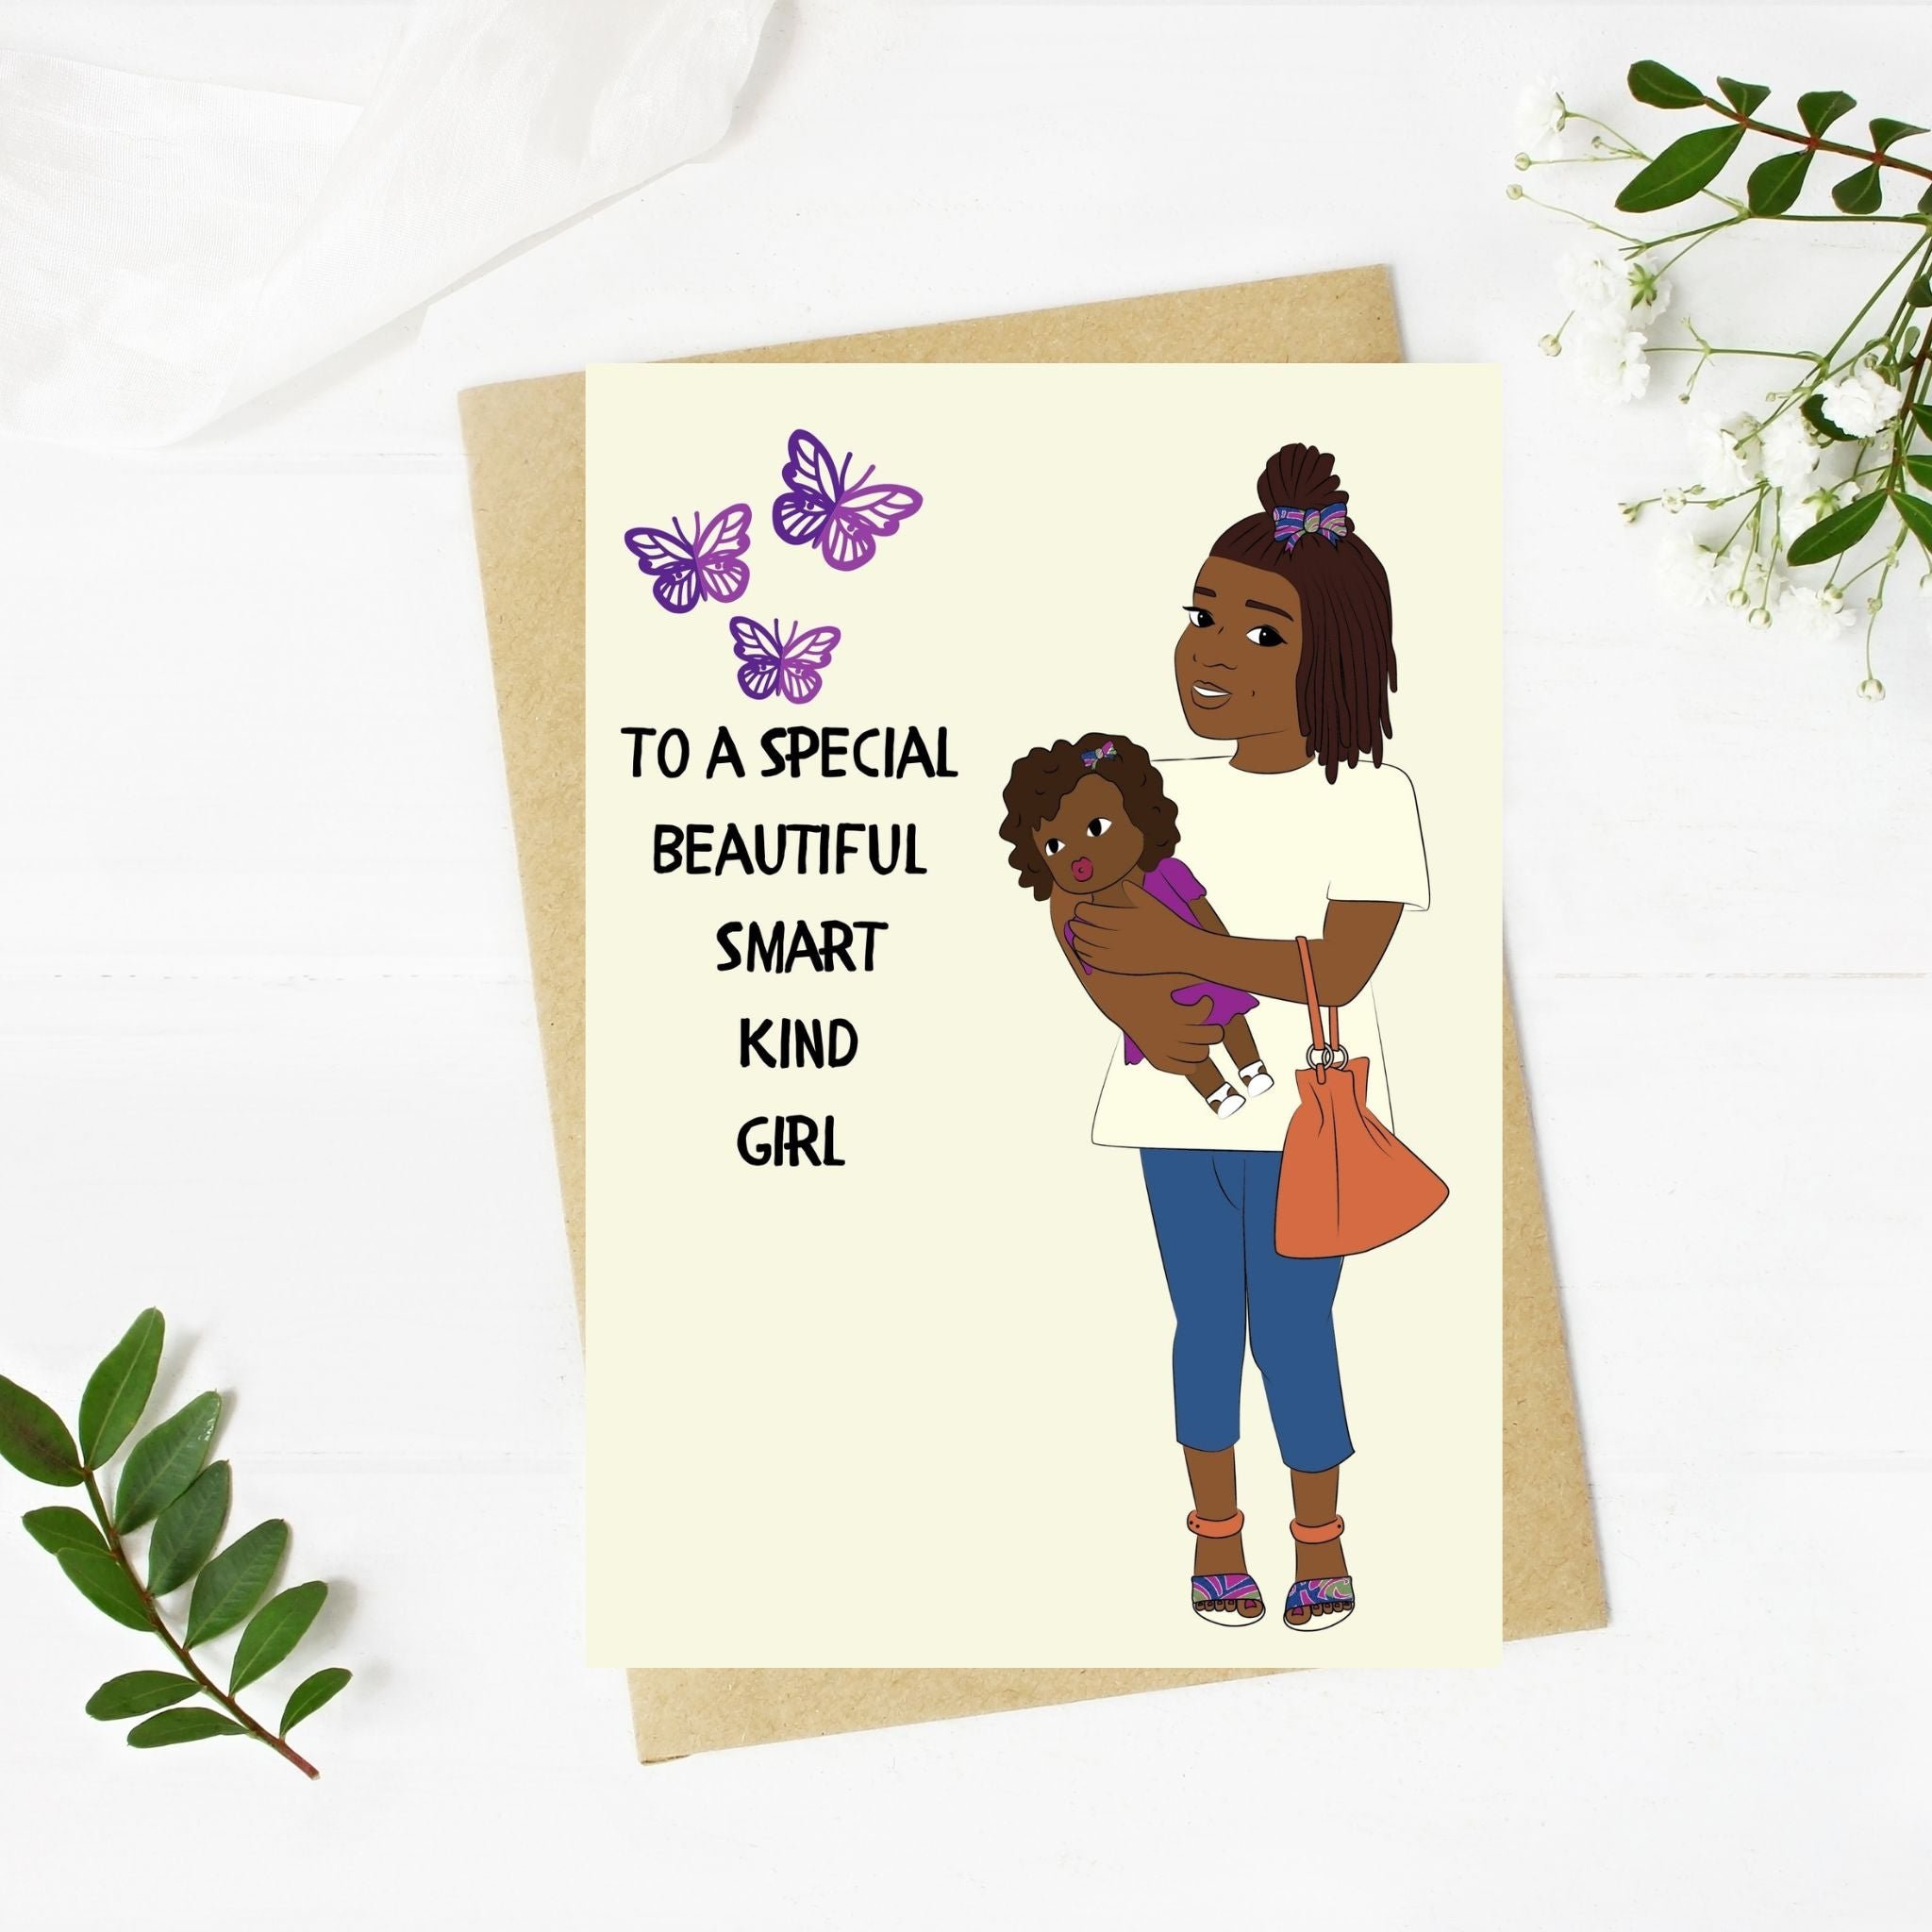 Little Black Girl with Doll Affirmation Greeting Card